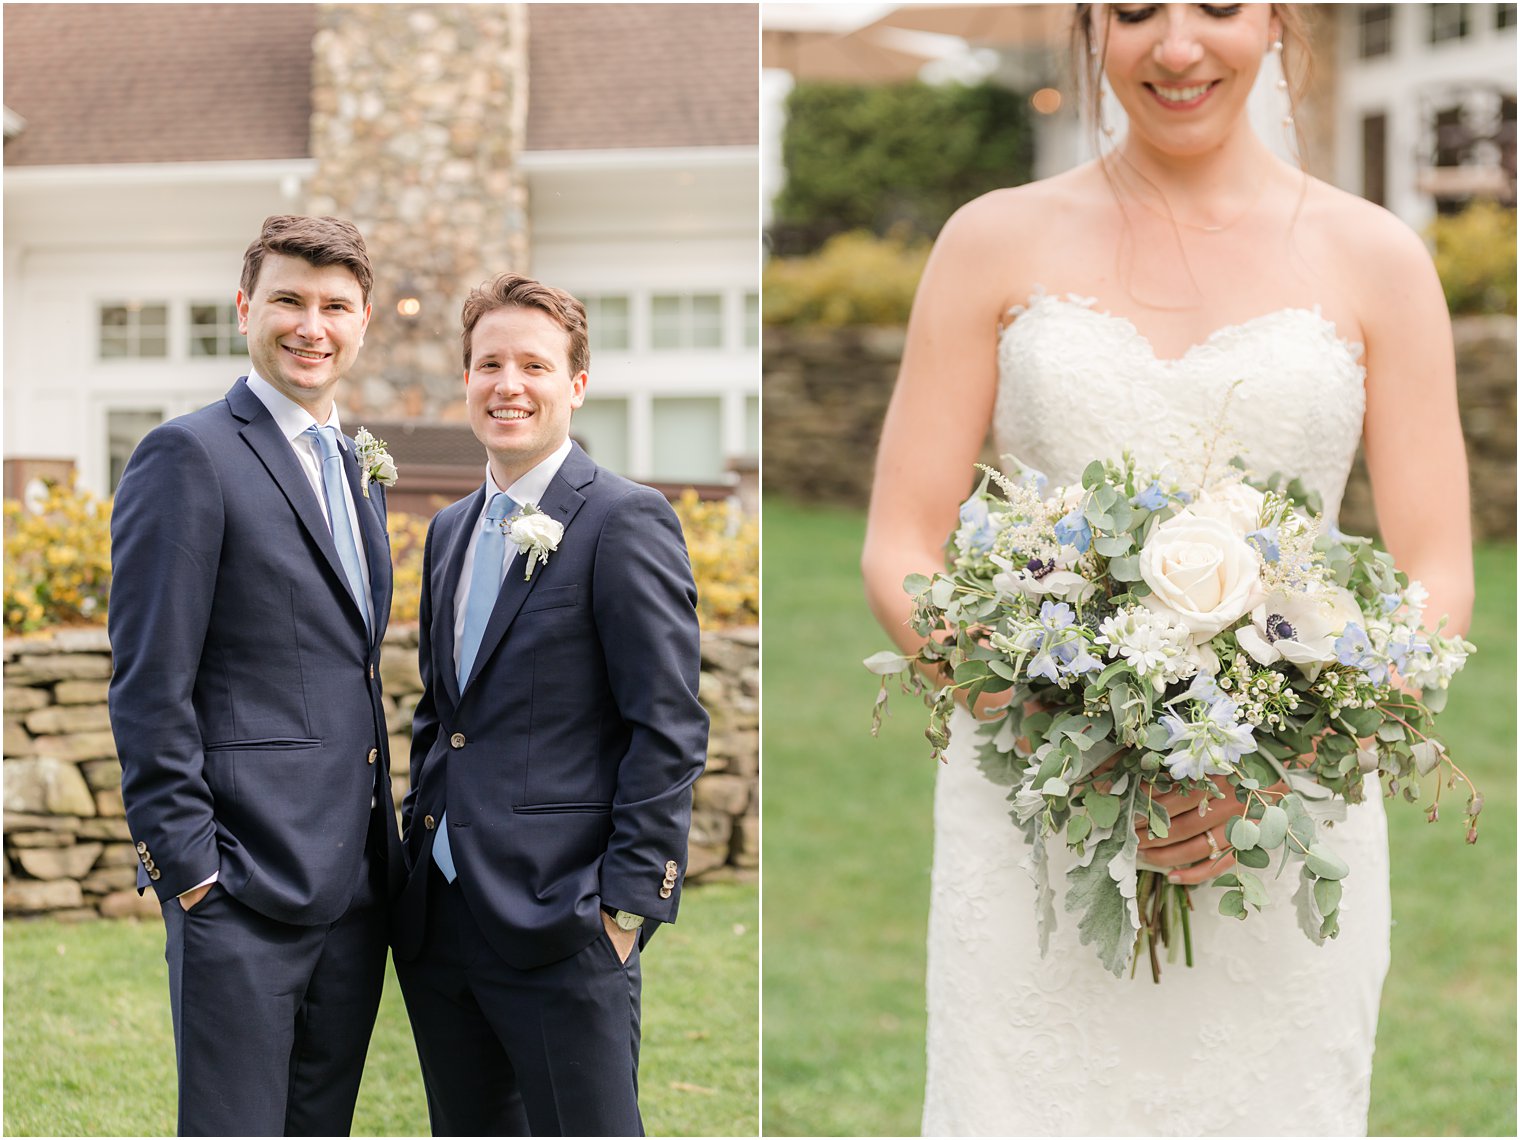 groom poses with groomsmen and bride holds bouquet of white and blue flowers